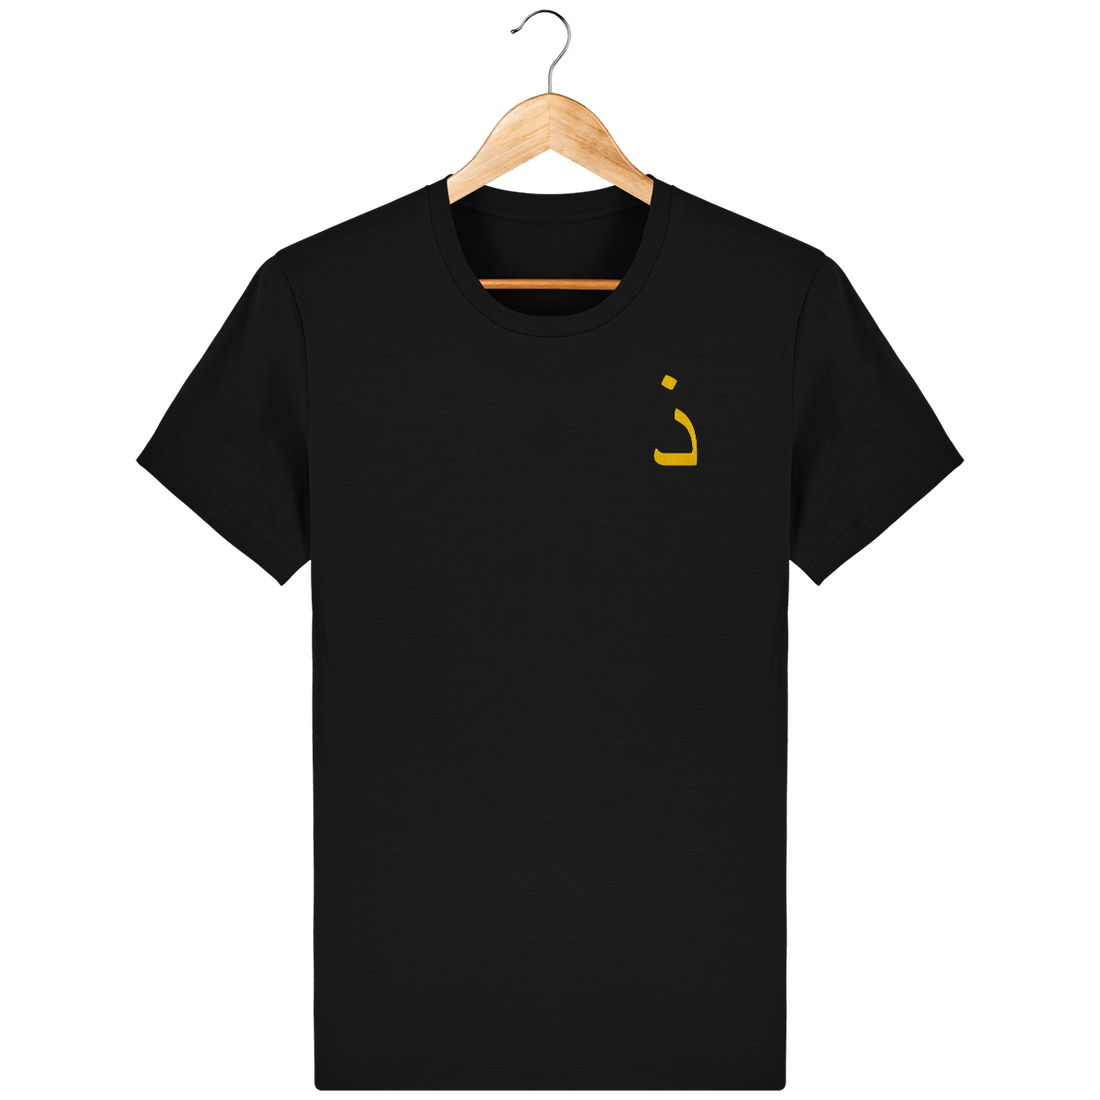 Unisexe>Tee-shirts - T-Shirt Homme <br> Lettre Arabe Thaal